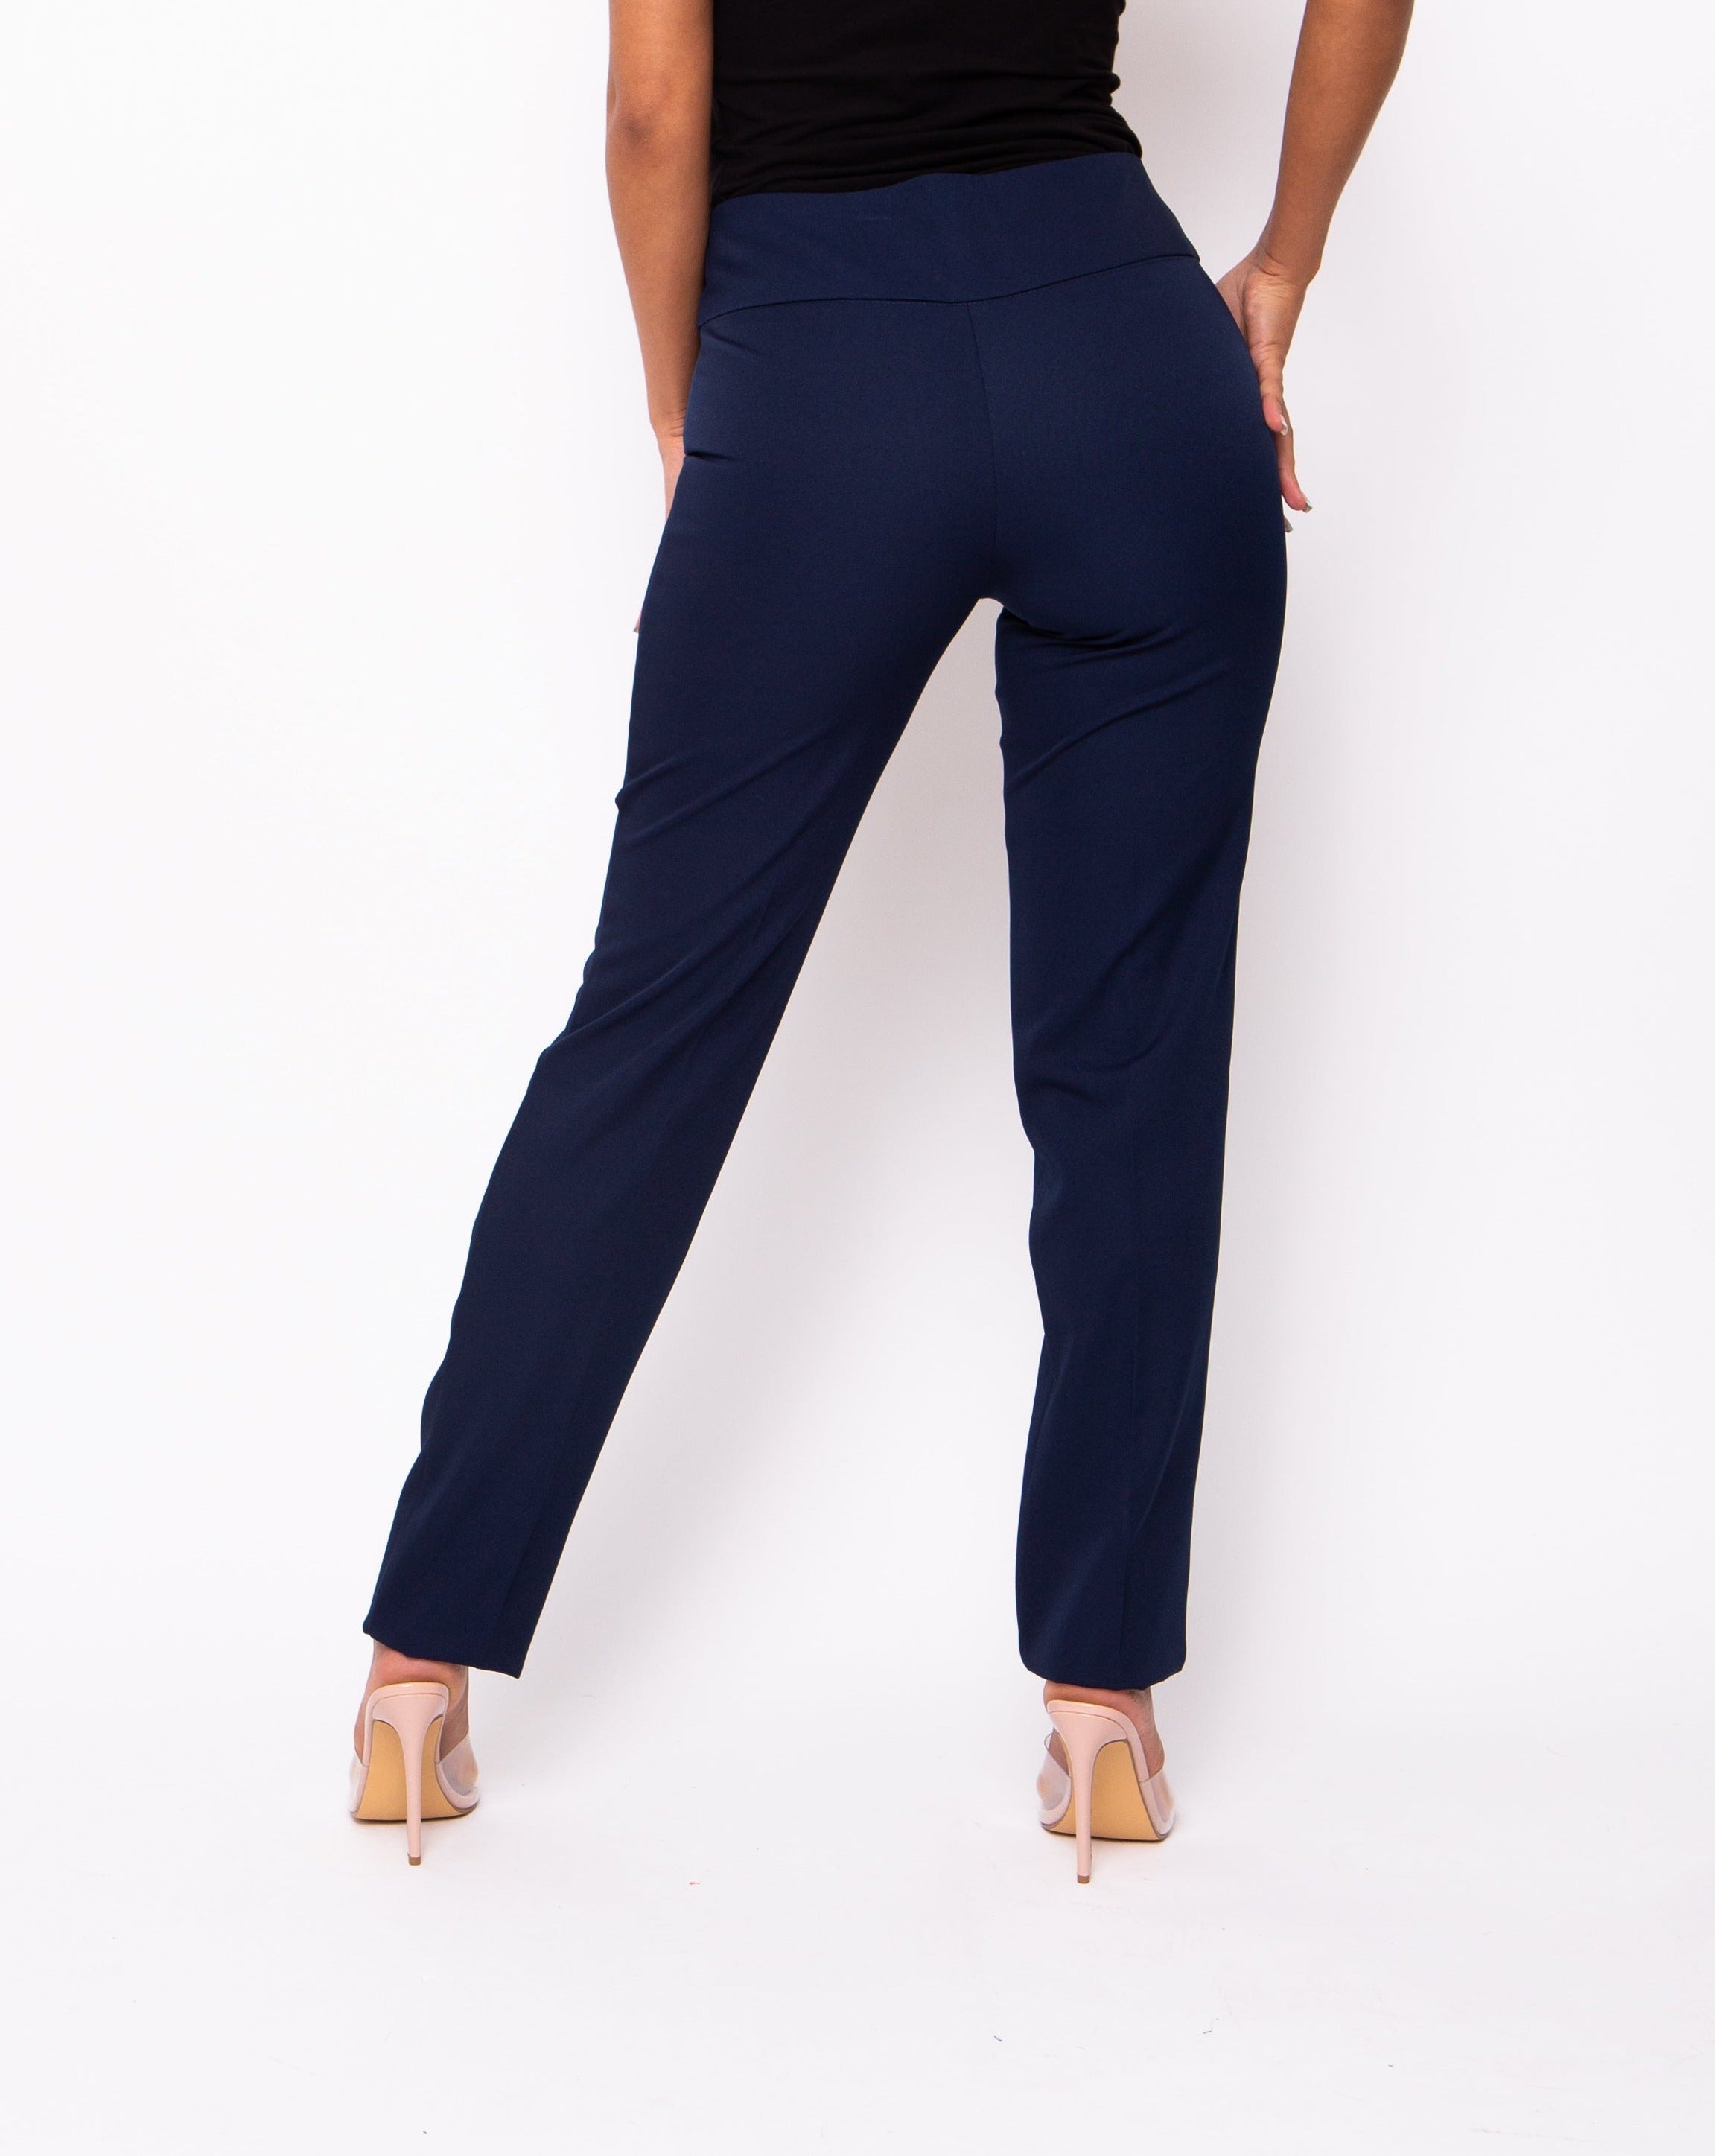 Flared twill trousers - Navy blue - Ladies | H&M IN